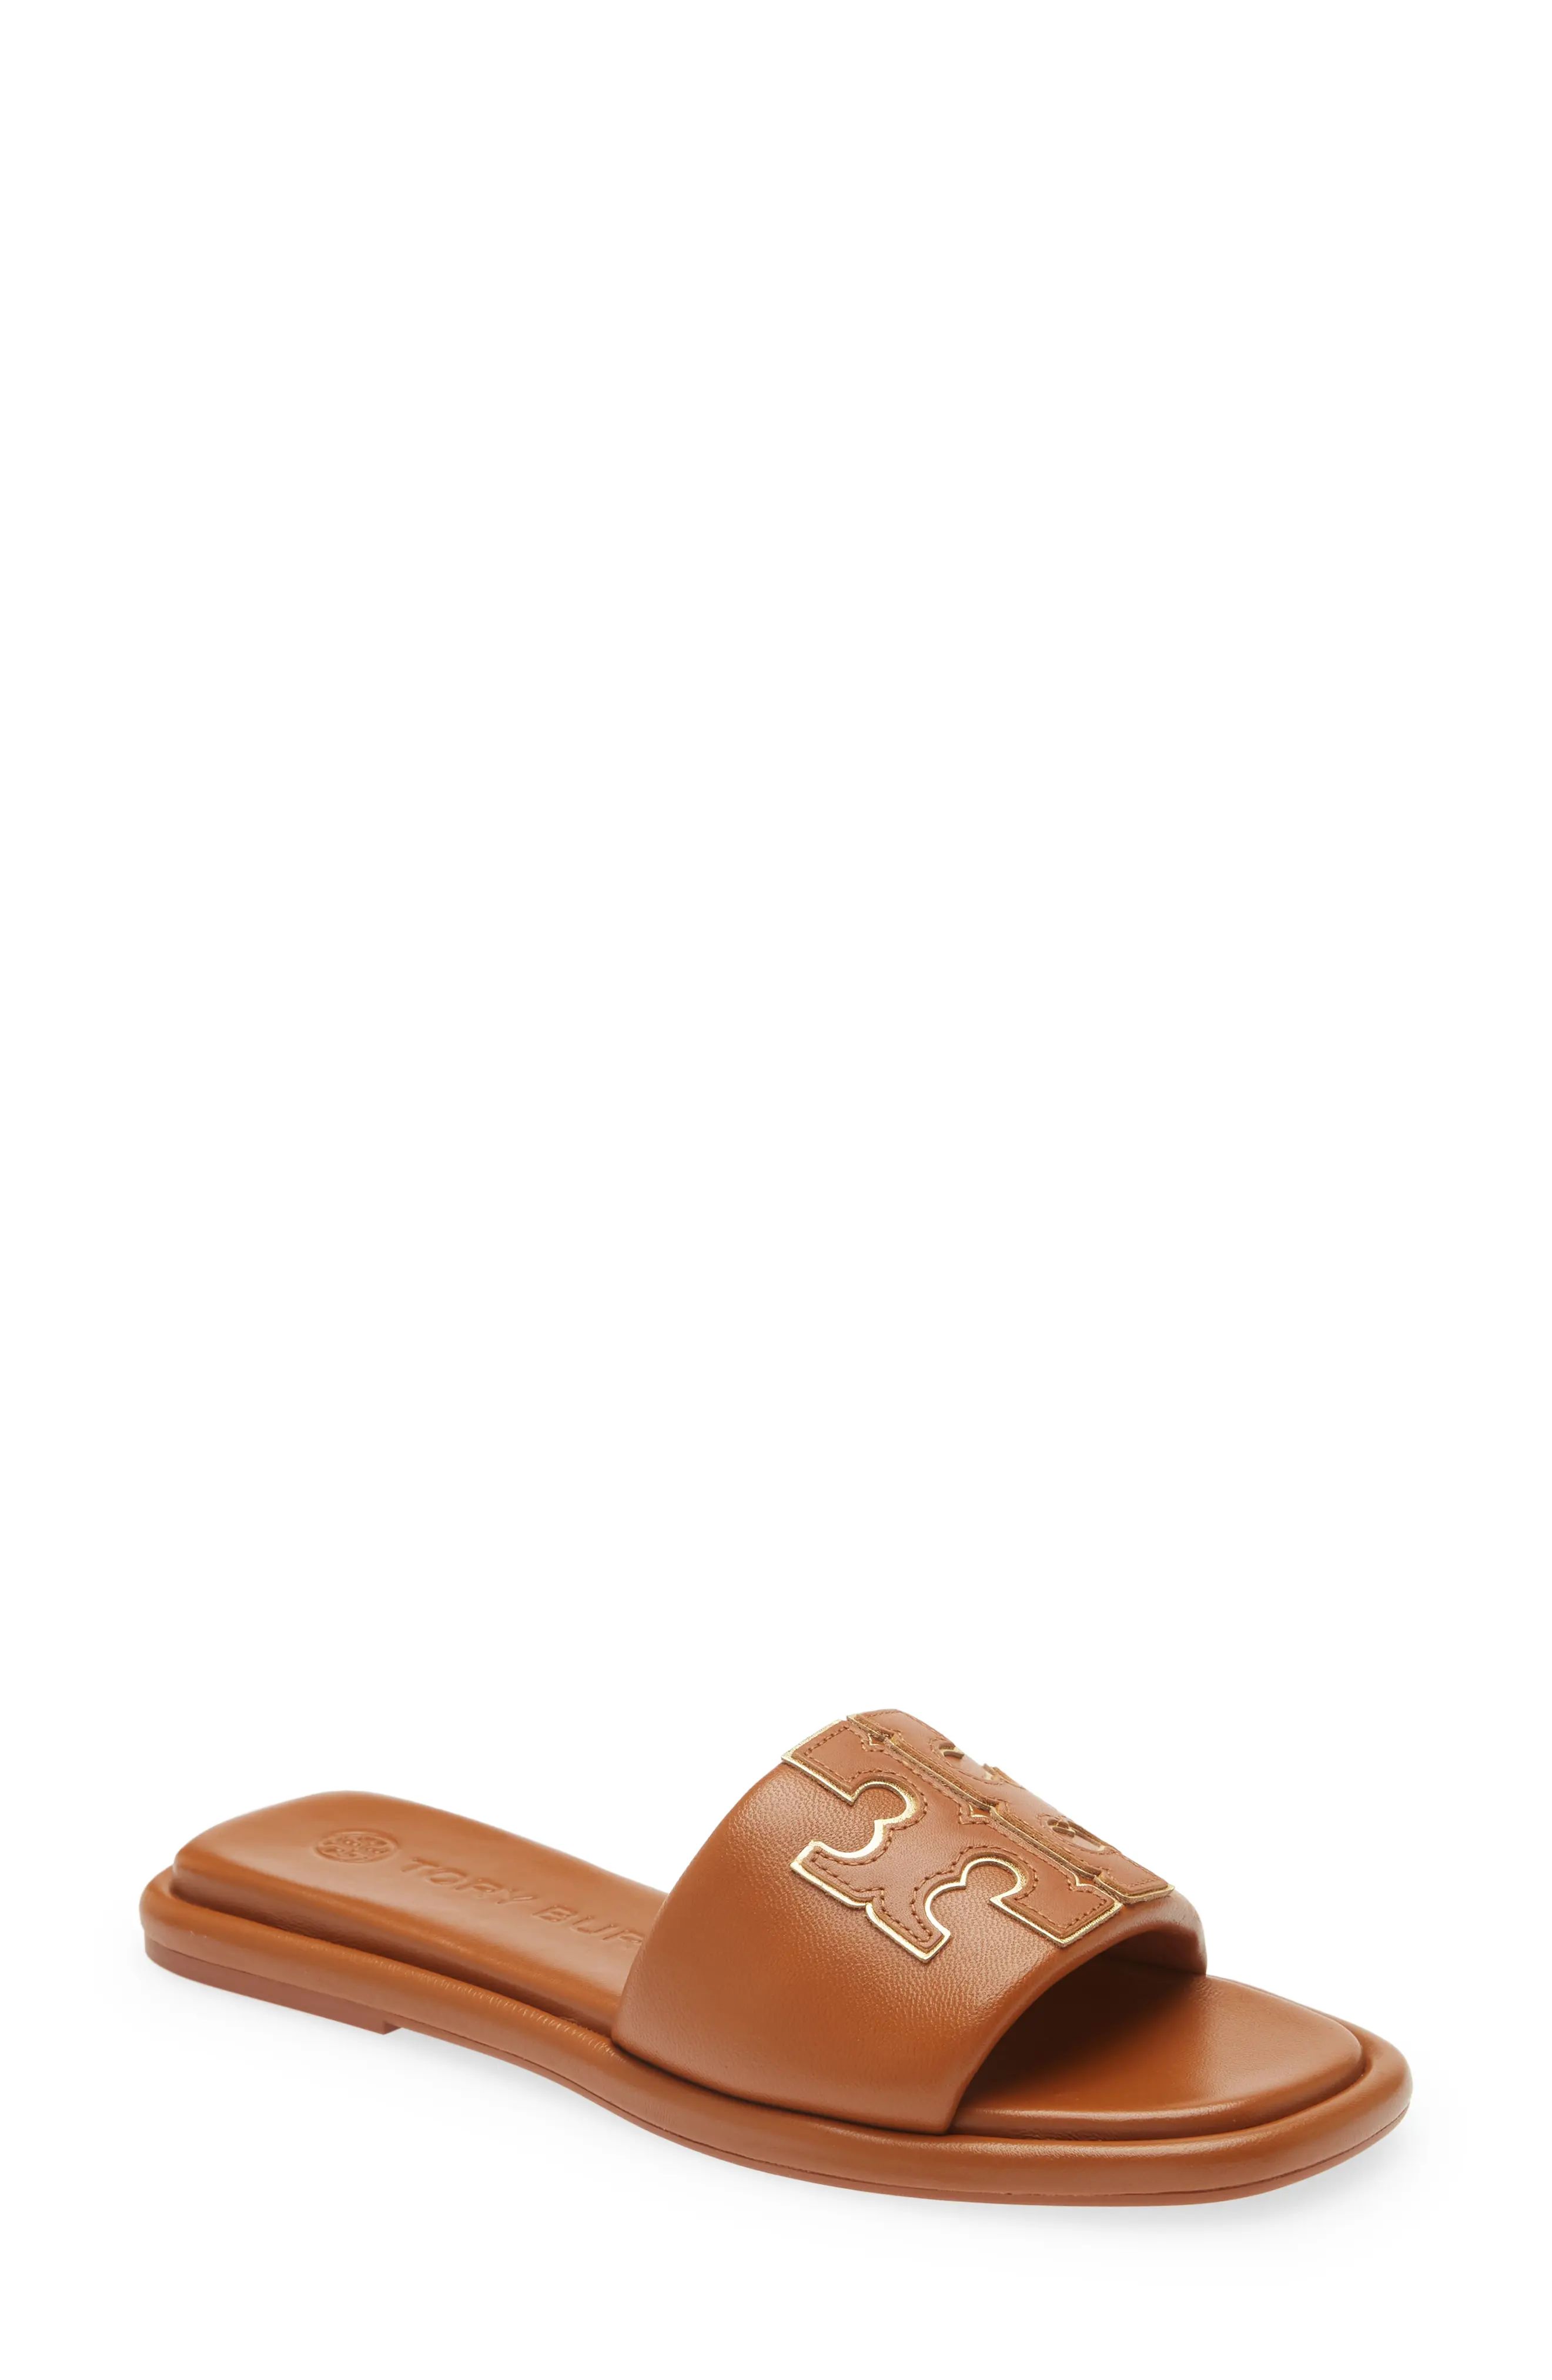 Tory Burch Double T Sport Slide Sandal in Miele/Gold at Nordstrom, Size 10 | Nordstrom